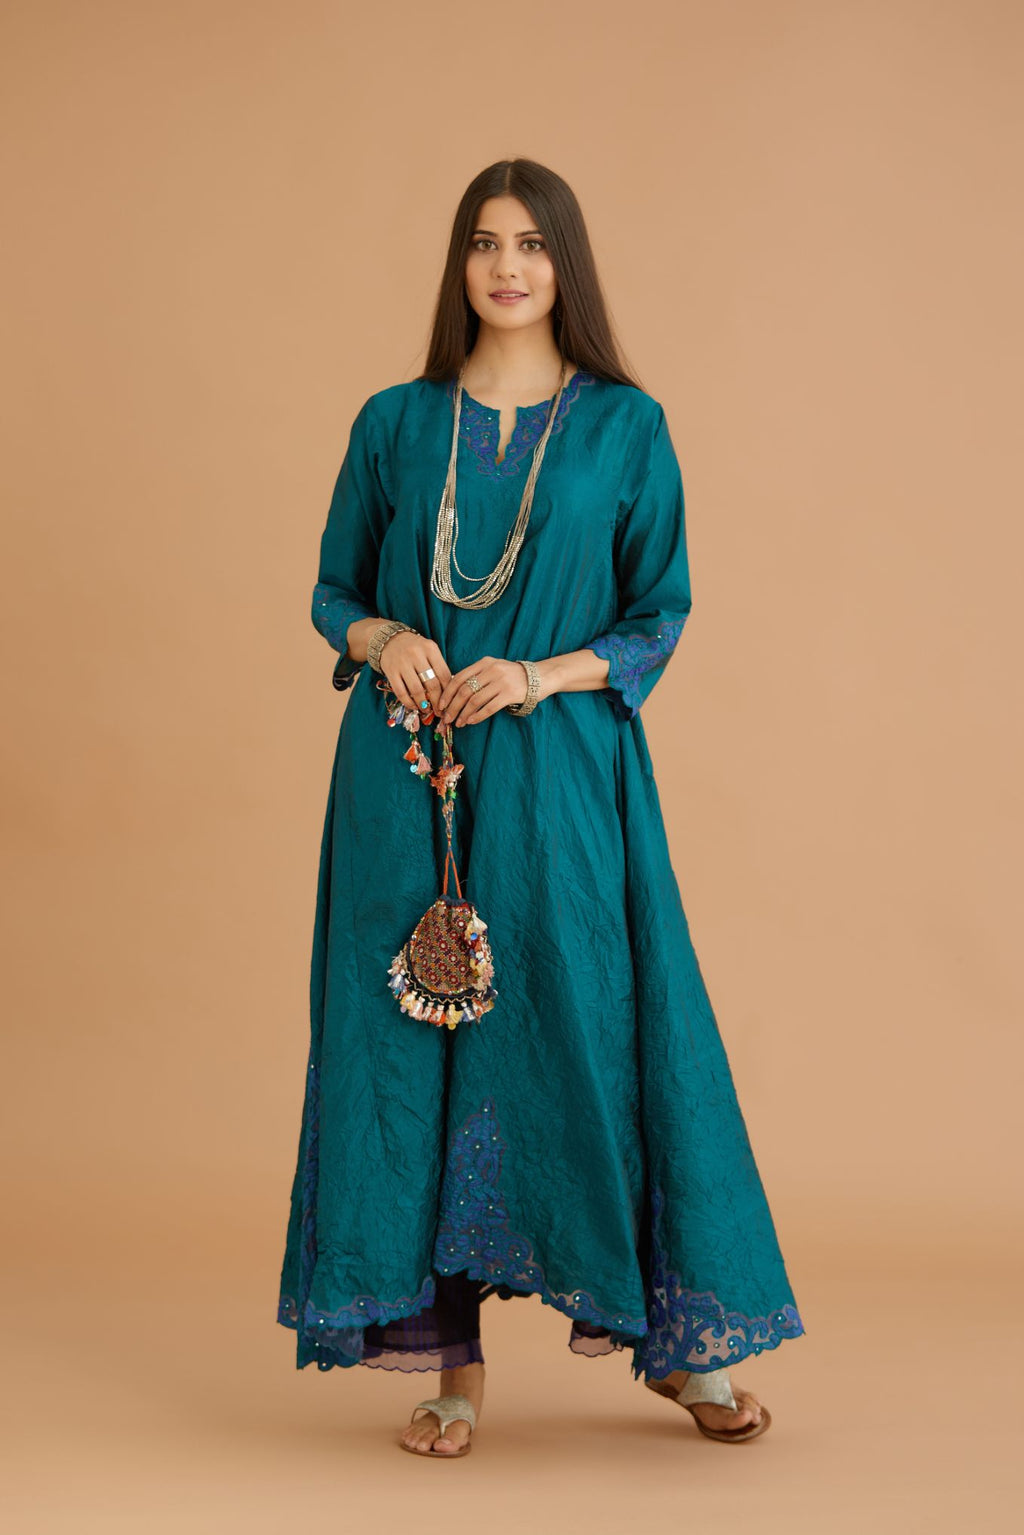 Teal green hand crushed silk kurta with cutwork embroidered asymmetric hem, highlighted with hand attached mirrors, paired with blue hand crushed silk pants with hand block print fine stripes and organza fabric and embroidery detail at bottom hem.